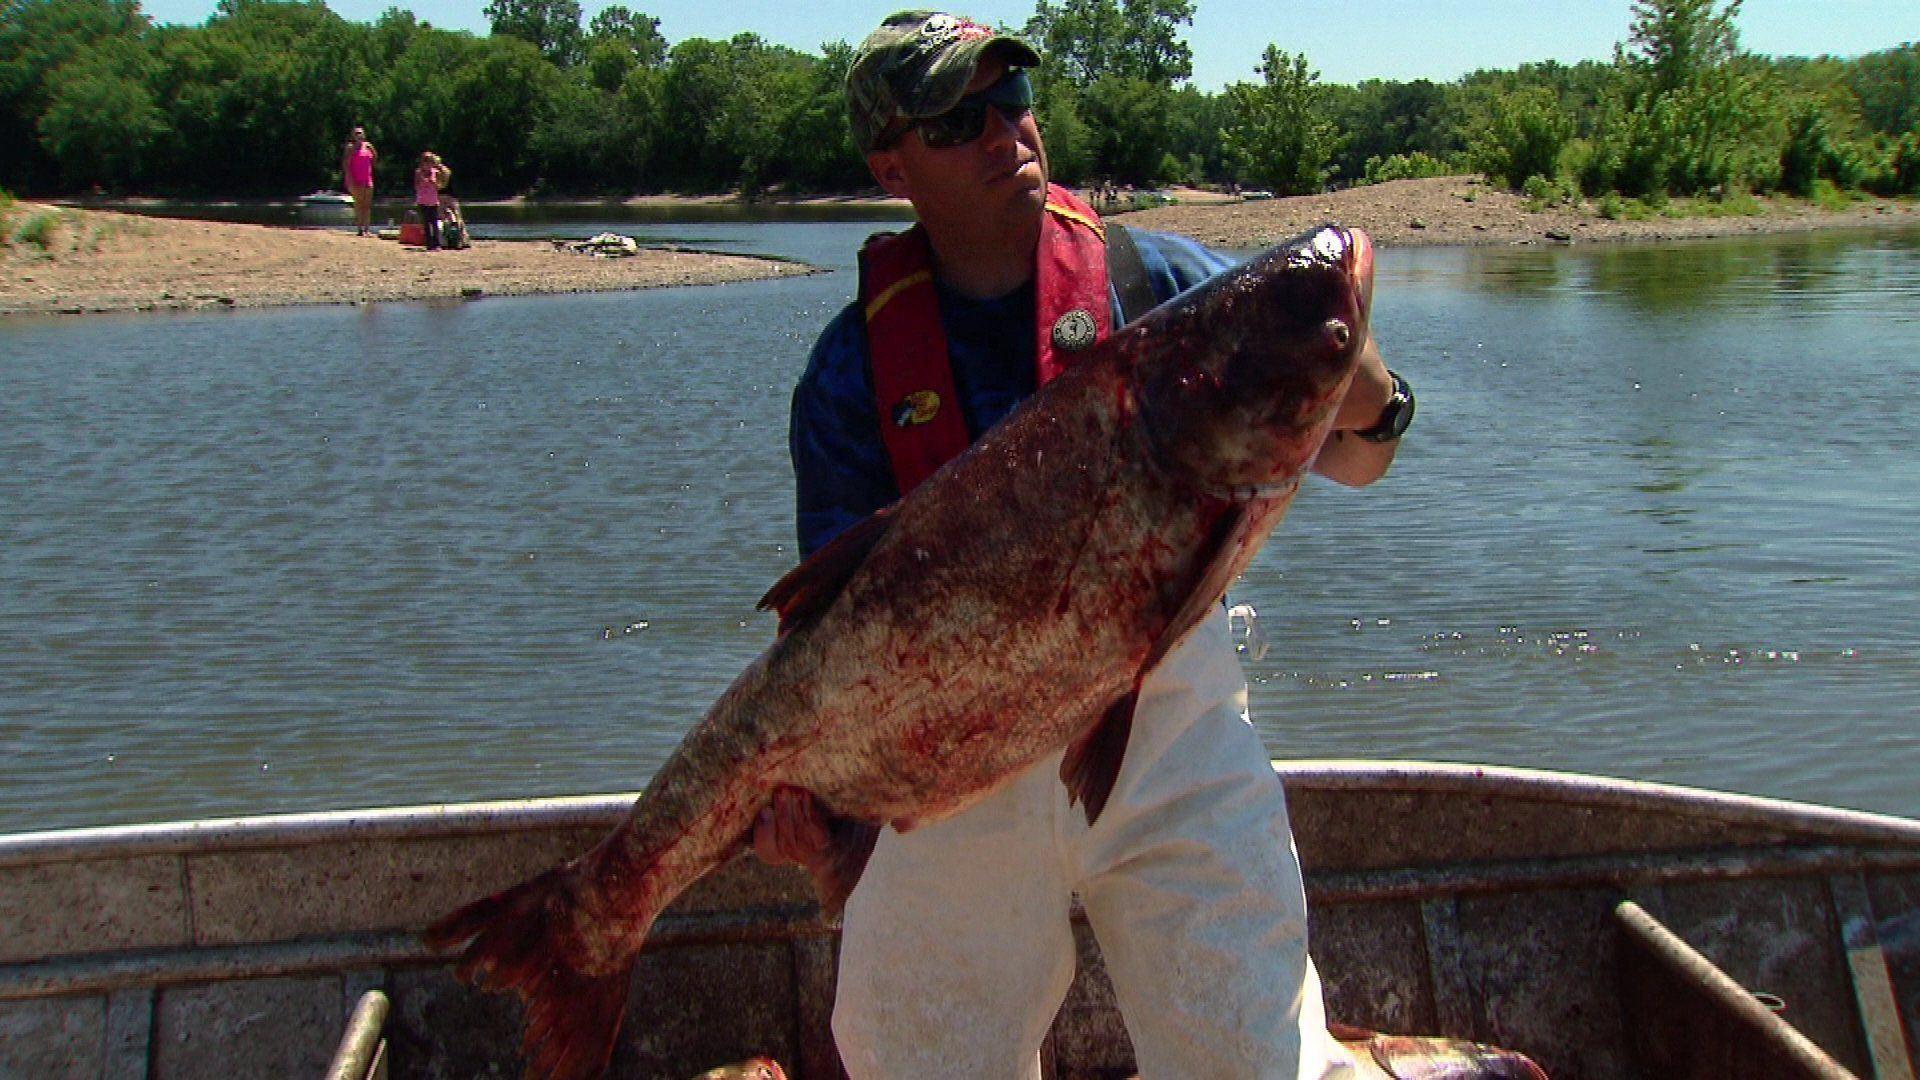 Asian carp infested waters